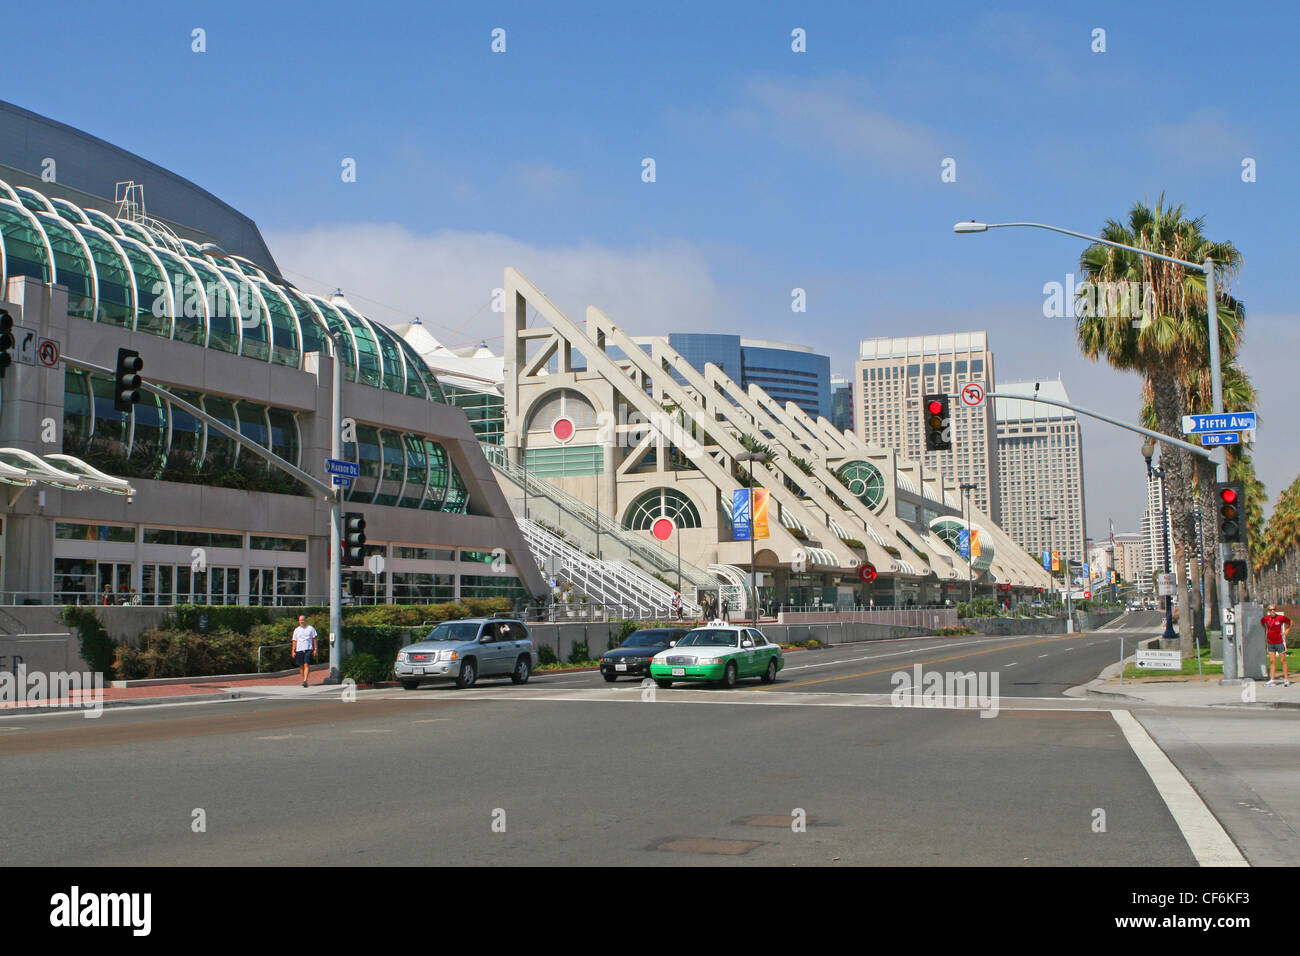 Images of San Diego, California, Convention Center Stock Photo